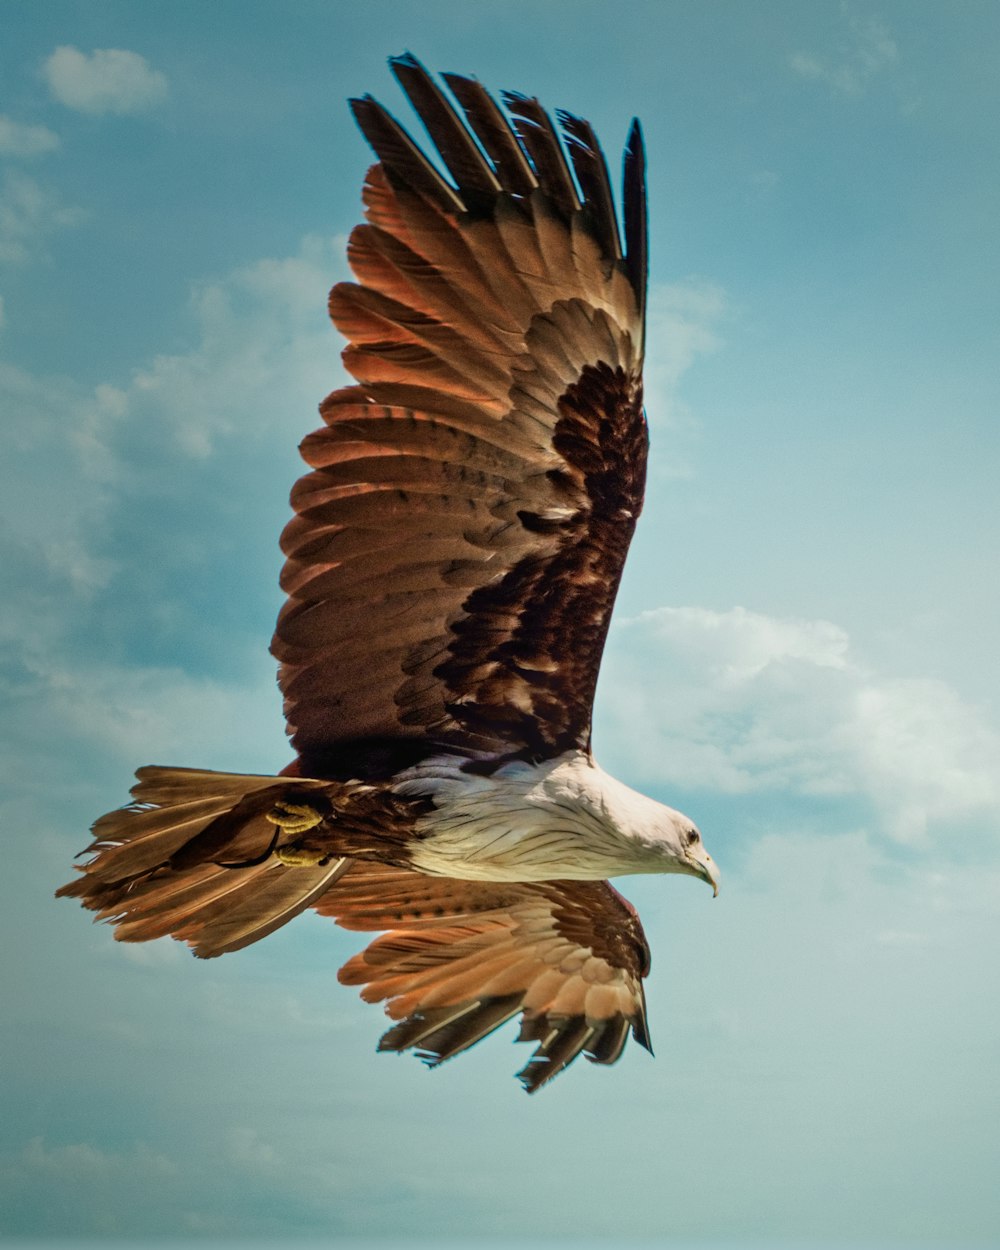 brown and white eagle flying under blue sky during daytime